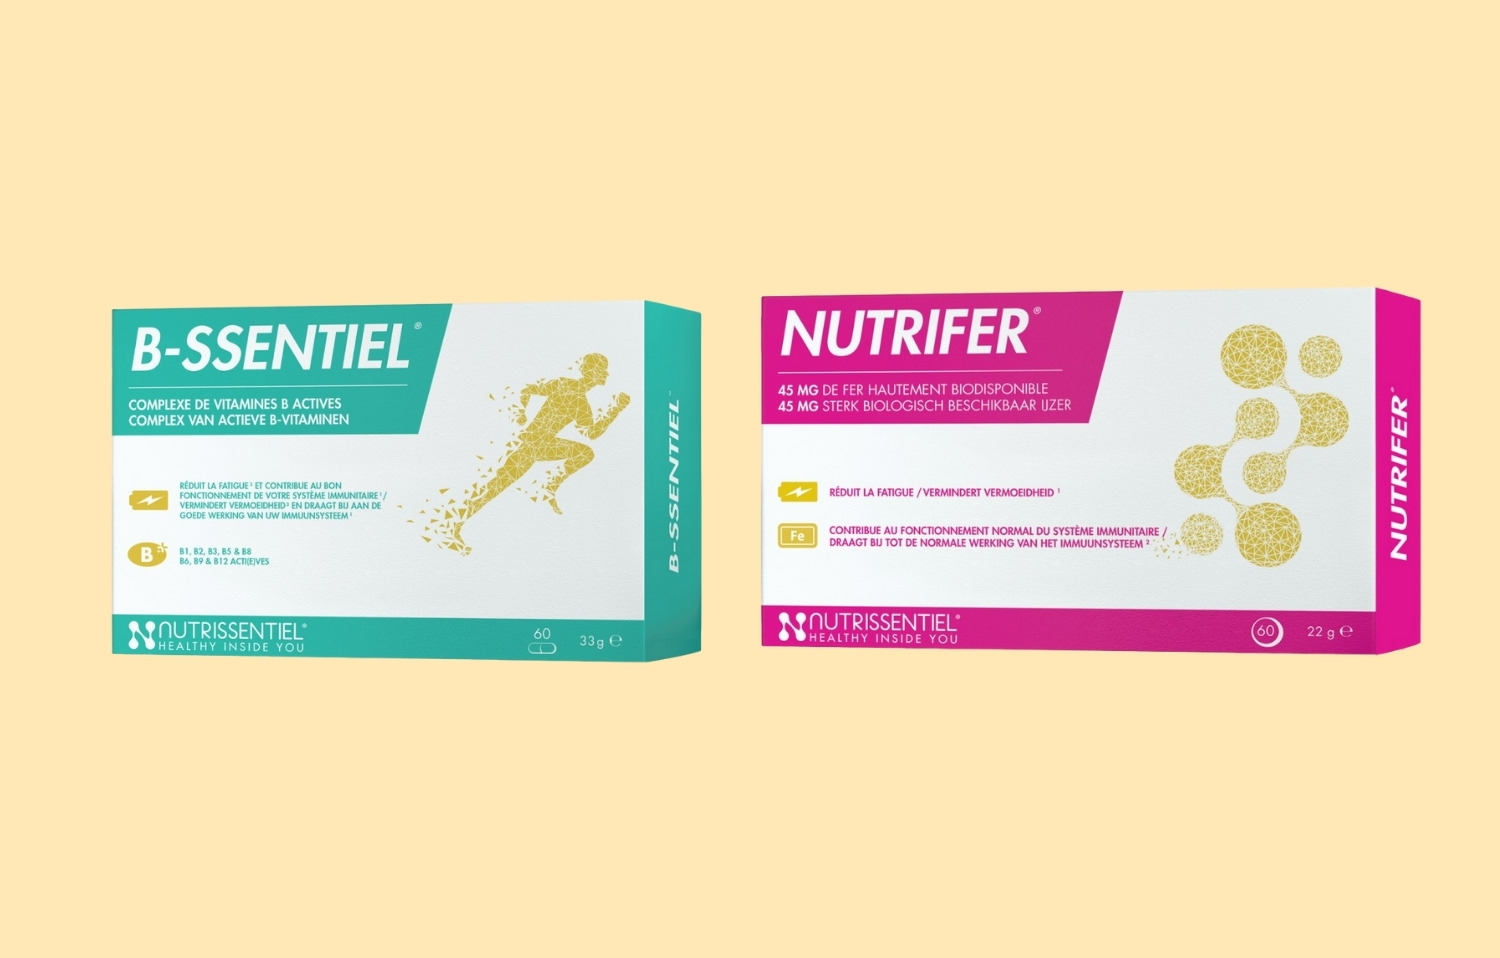 New products from Nutrissentiel: discover Nutrifer and B-ssentiel to restore your energy